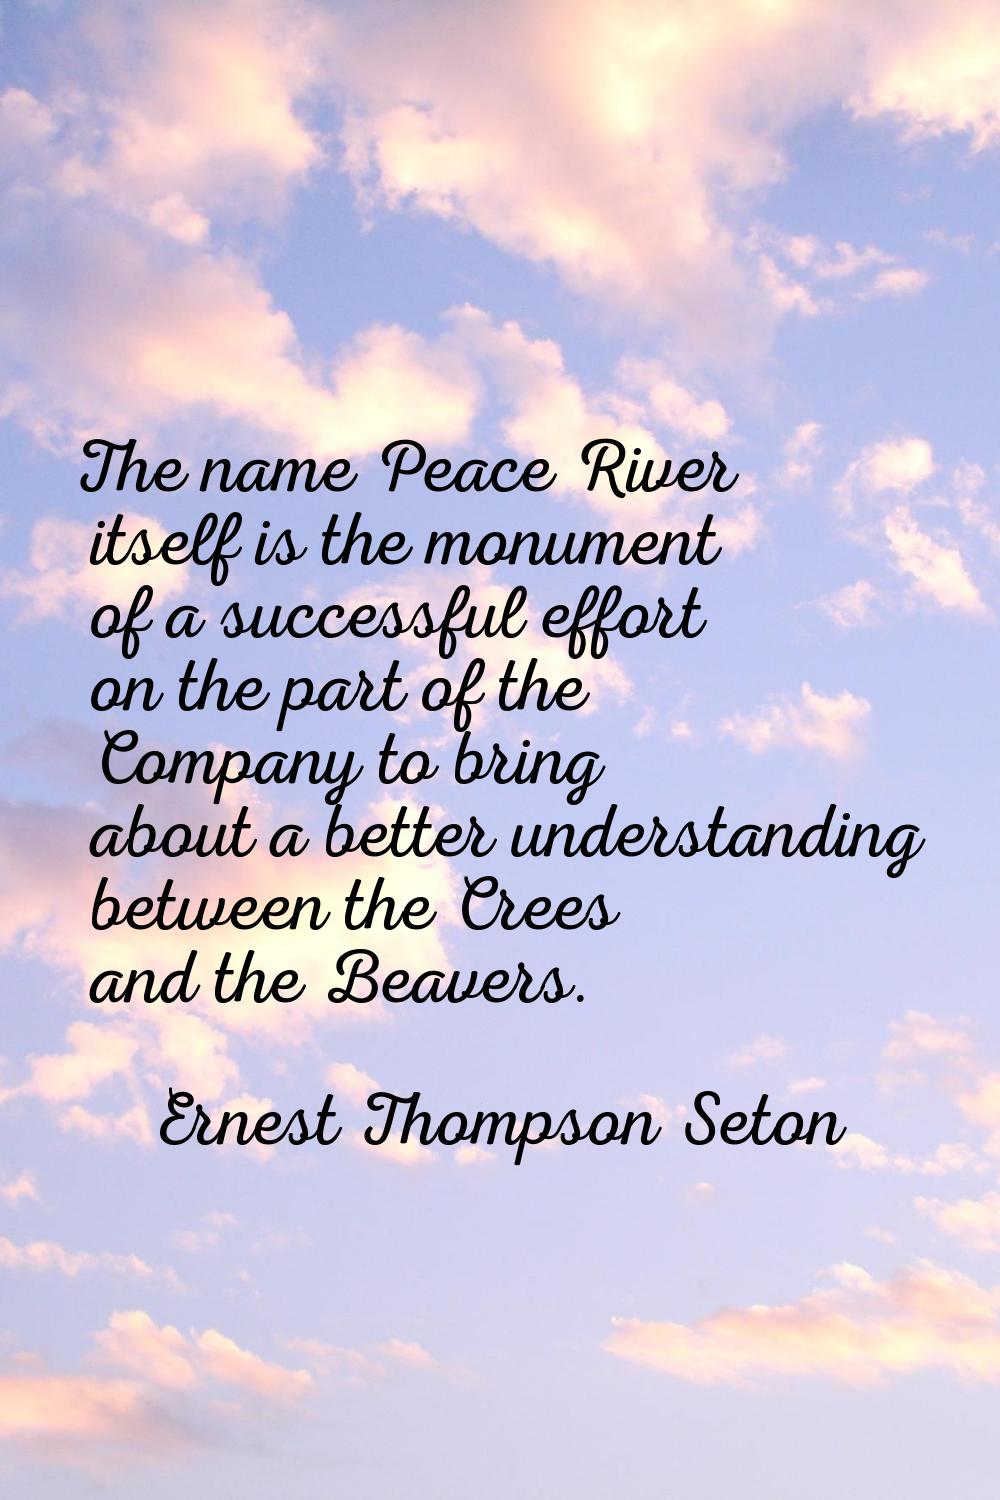 The name Peace River itself is the monument of a successful effort on the part of the Company to br